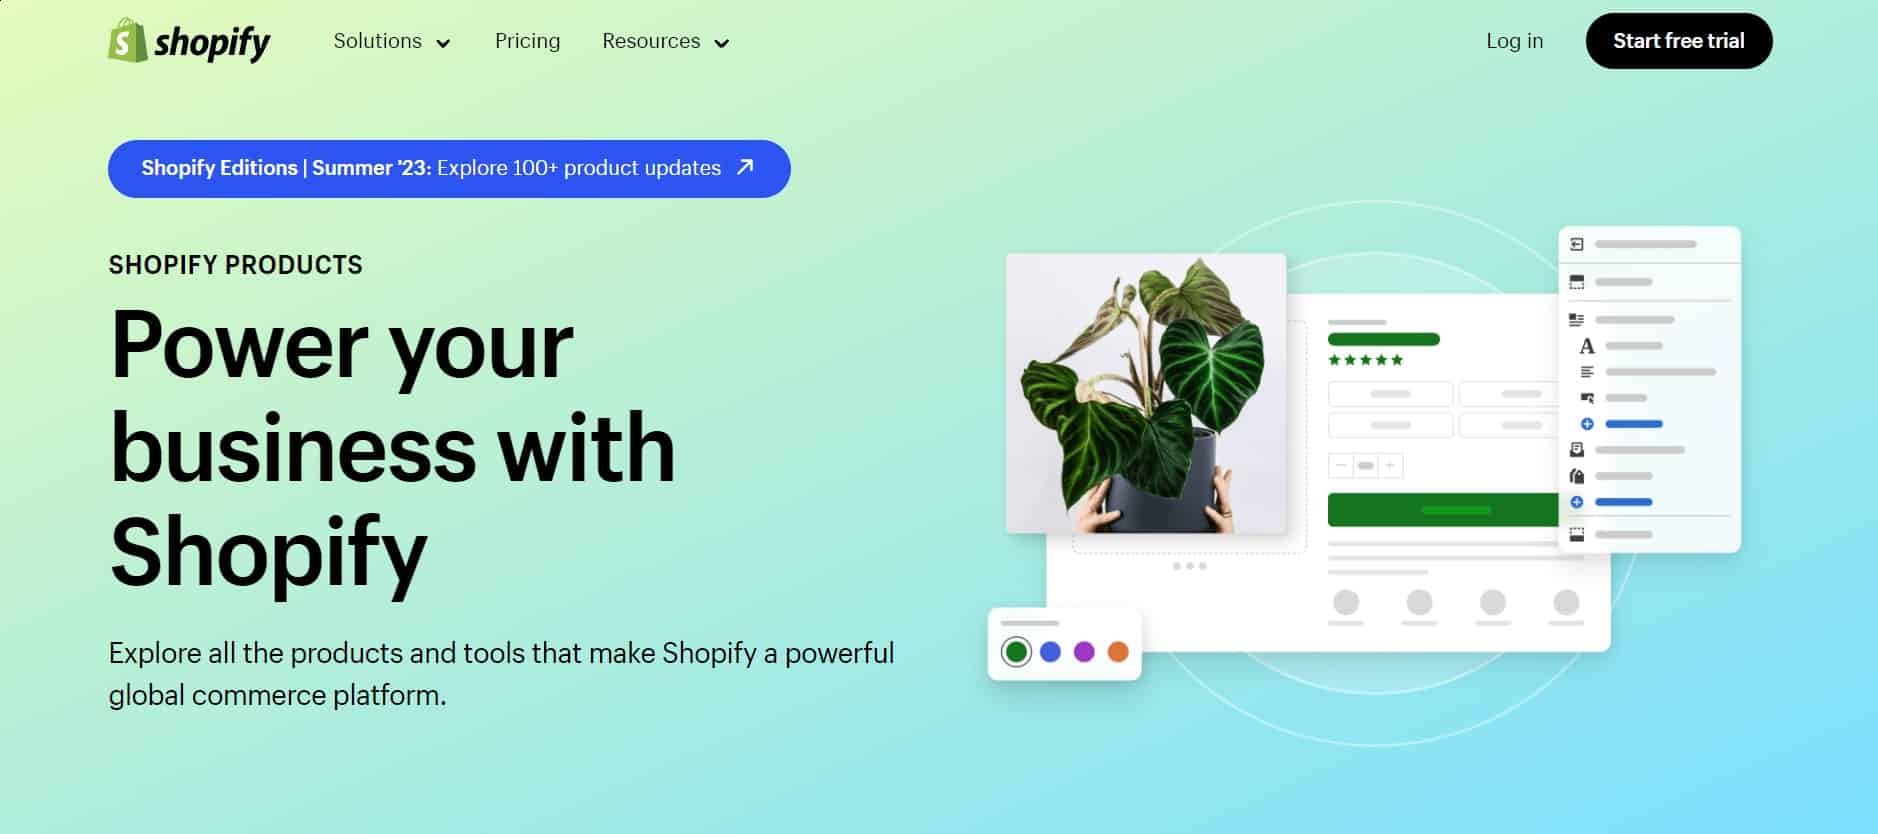 shopify feature